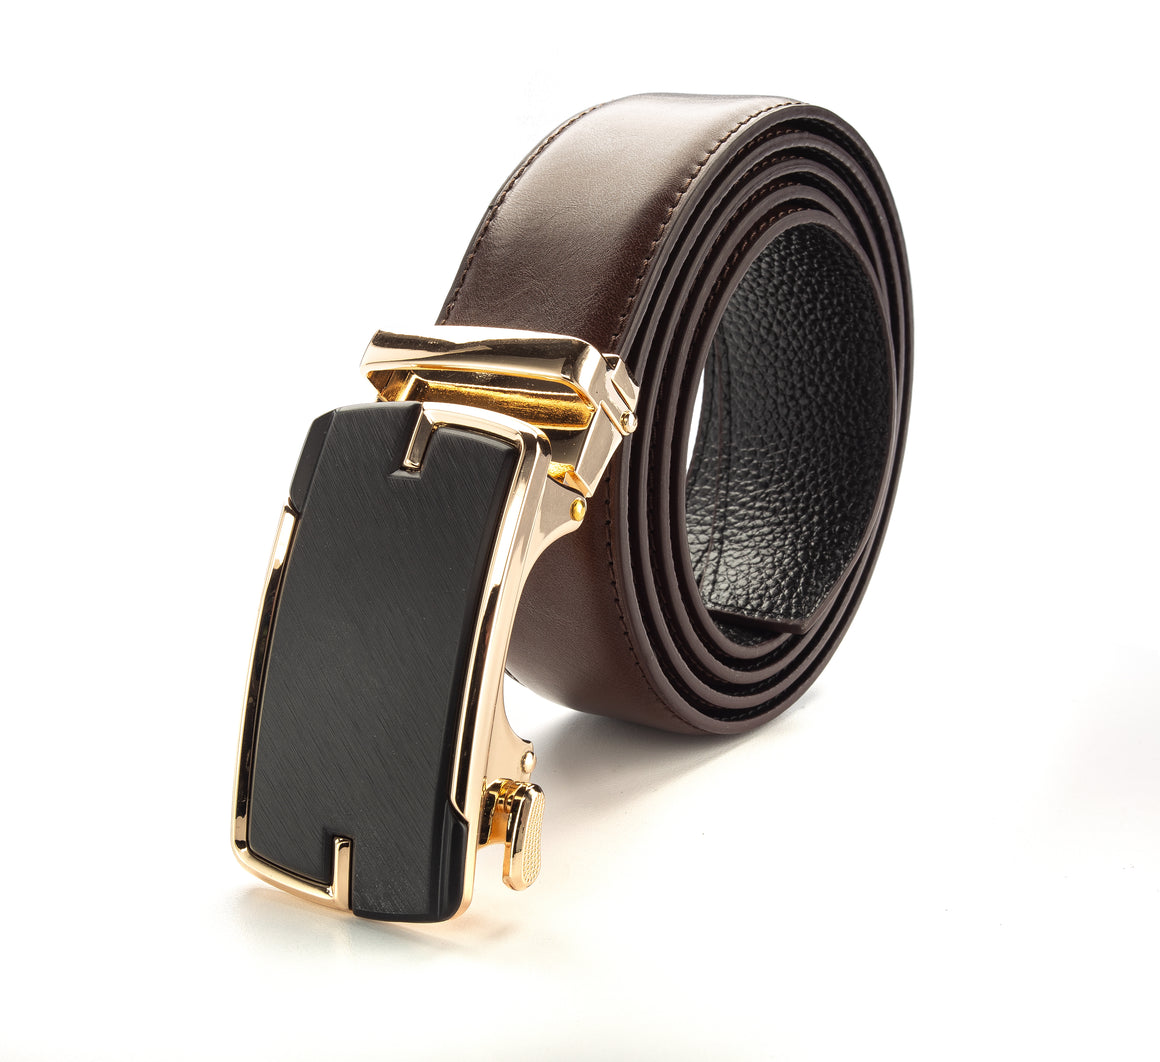 Experience the fusion of formal and casual with Royal's Men's Leather Track Belts | BELT-41